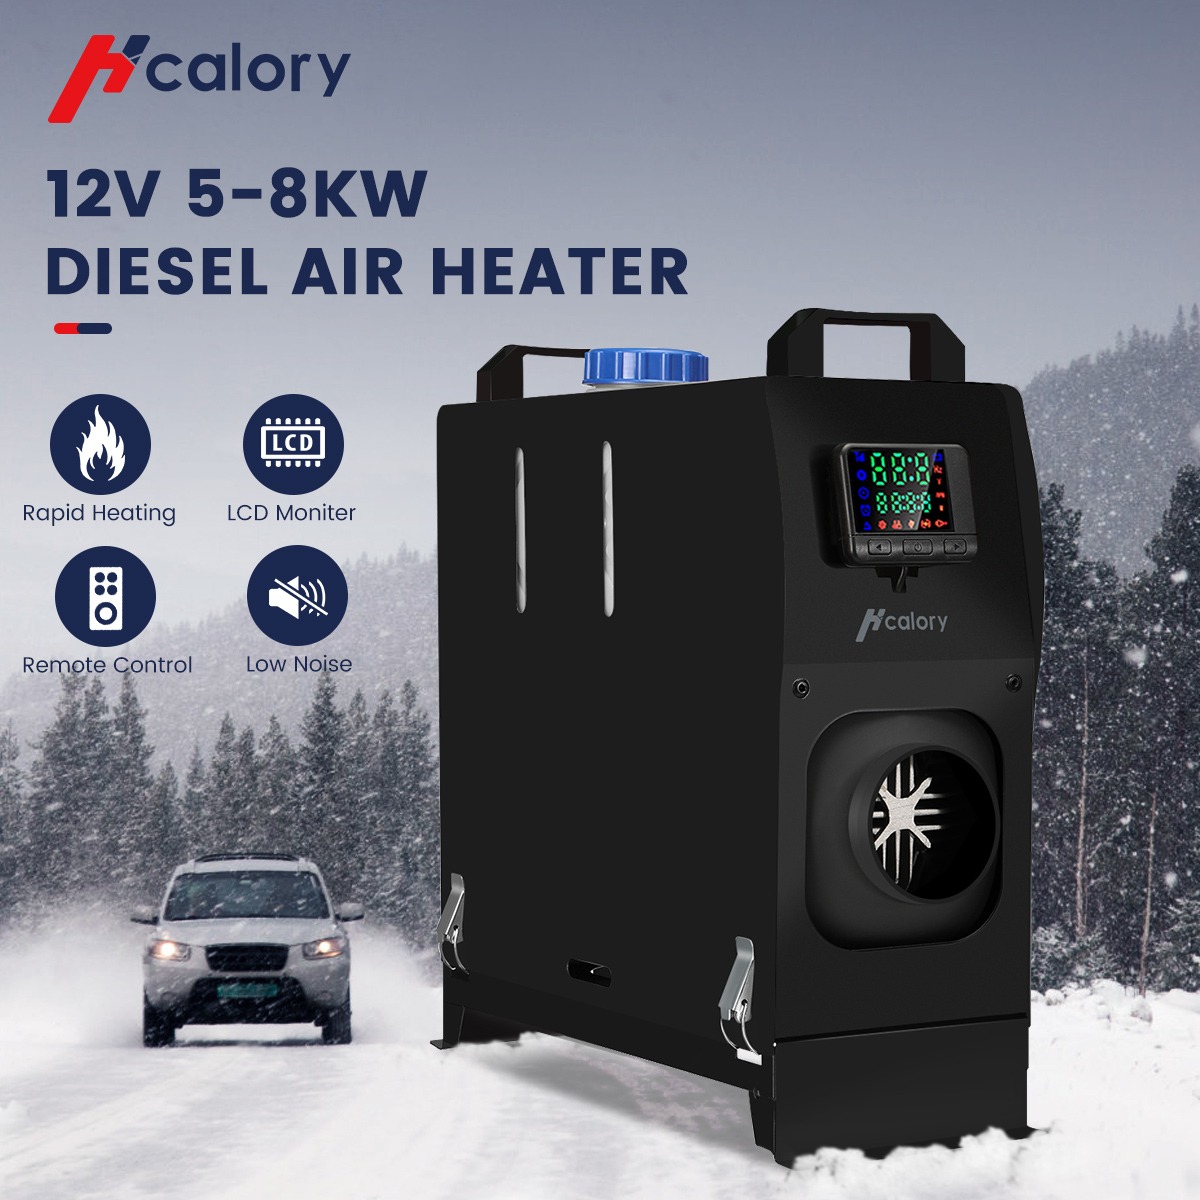 https://chinacoupon.info/wp-content/uploads/2024/01/Hcalory-12V-5-8KW-Diesel-Air-Heater.jpg